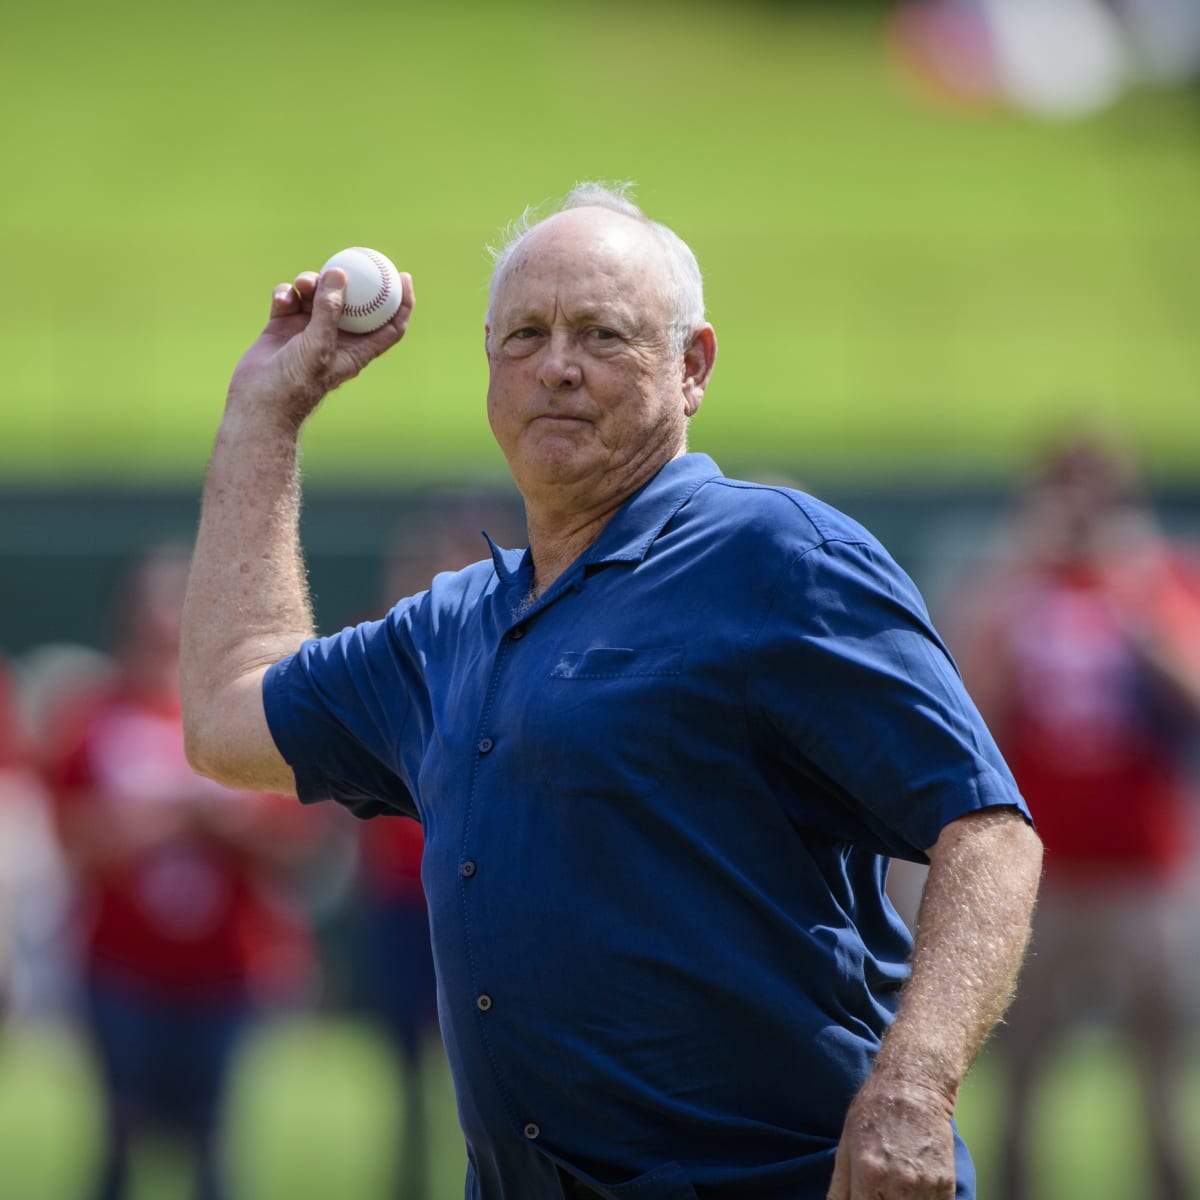 Top starting pitchers in Rangers history: Who else joins Nolan Ryan?